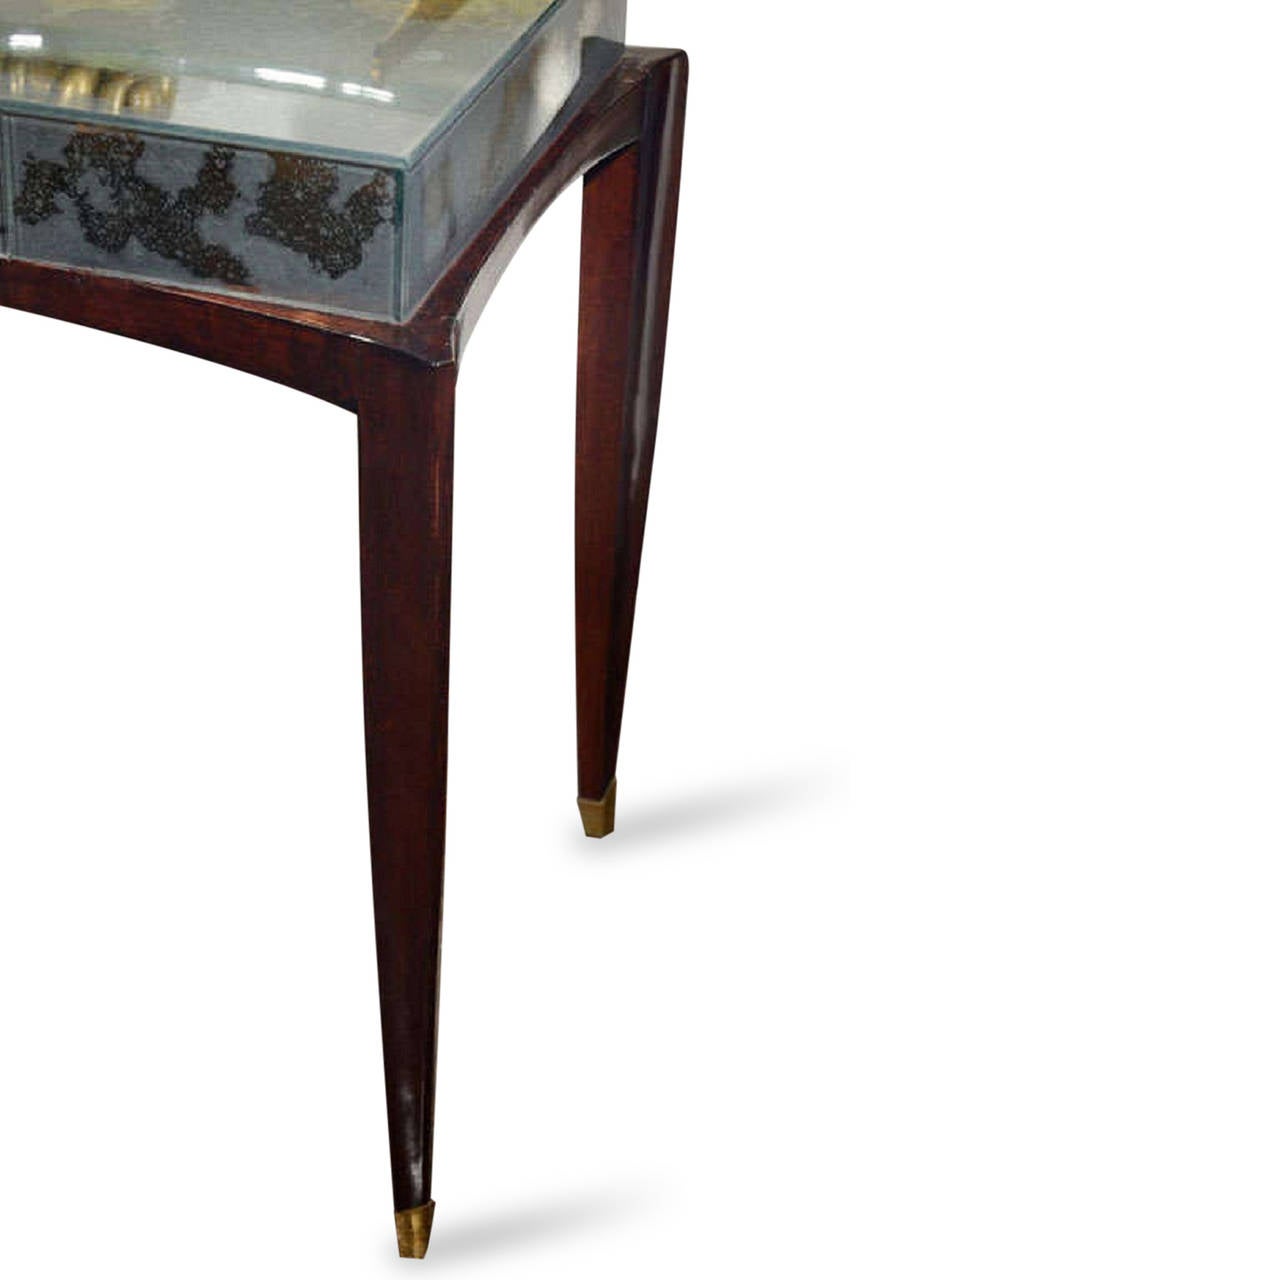 Antiqued mirrored glass vanity, the case resting on tapered mahogany legs with bronze sabots. Has single, central drawer and bronze drawer pull. French 1930s. Length 37 in, depth 21 in, height 29 in.

WINTER SALE - 40% OFF - One Week Only